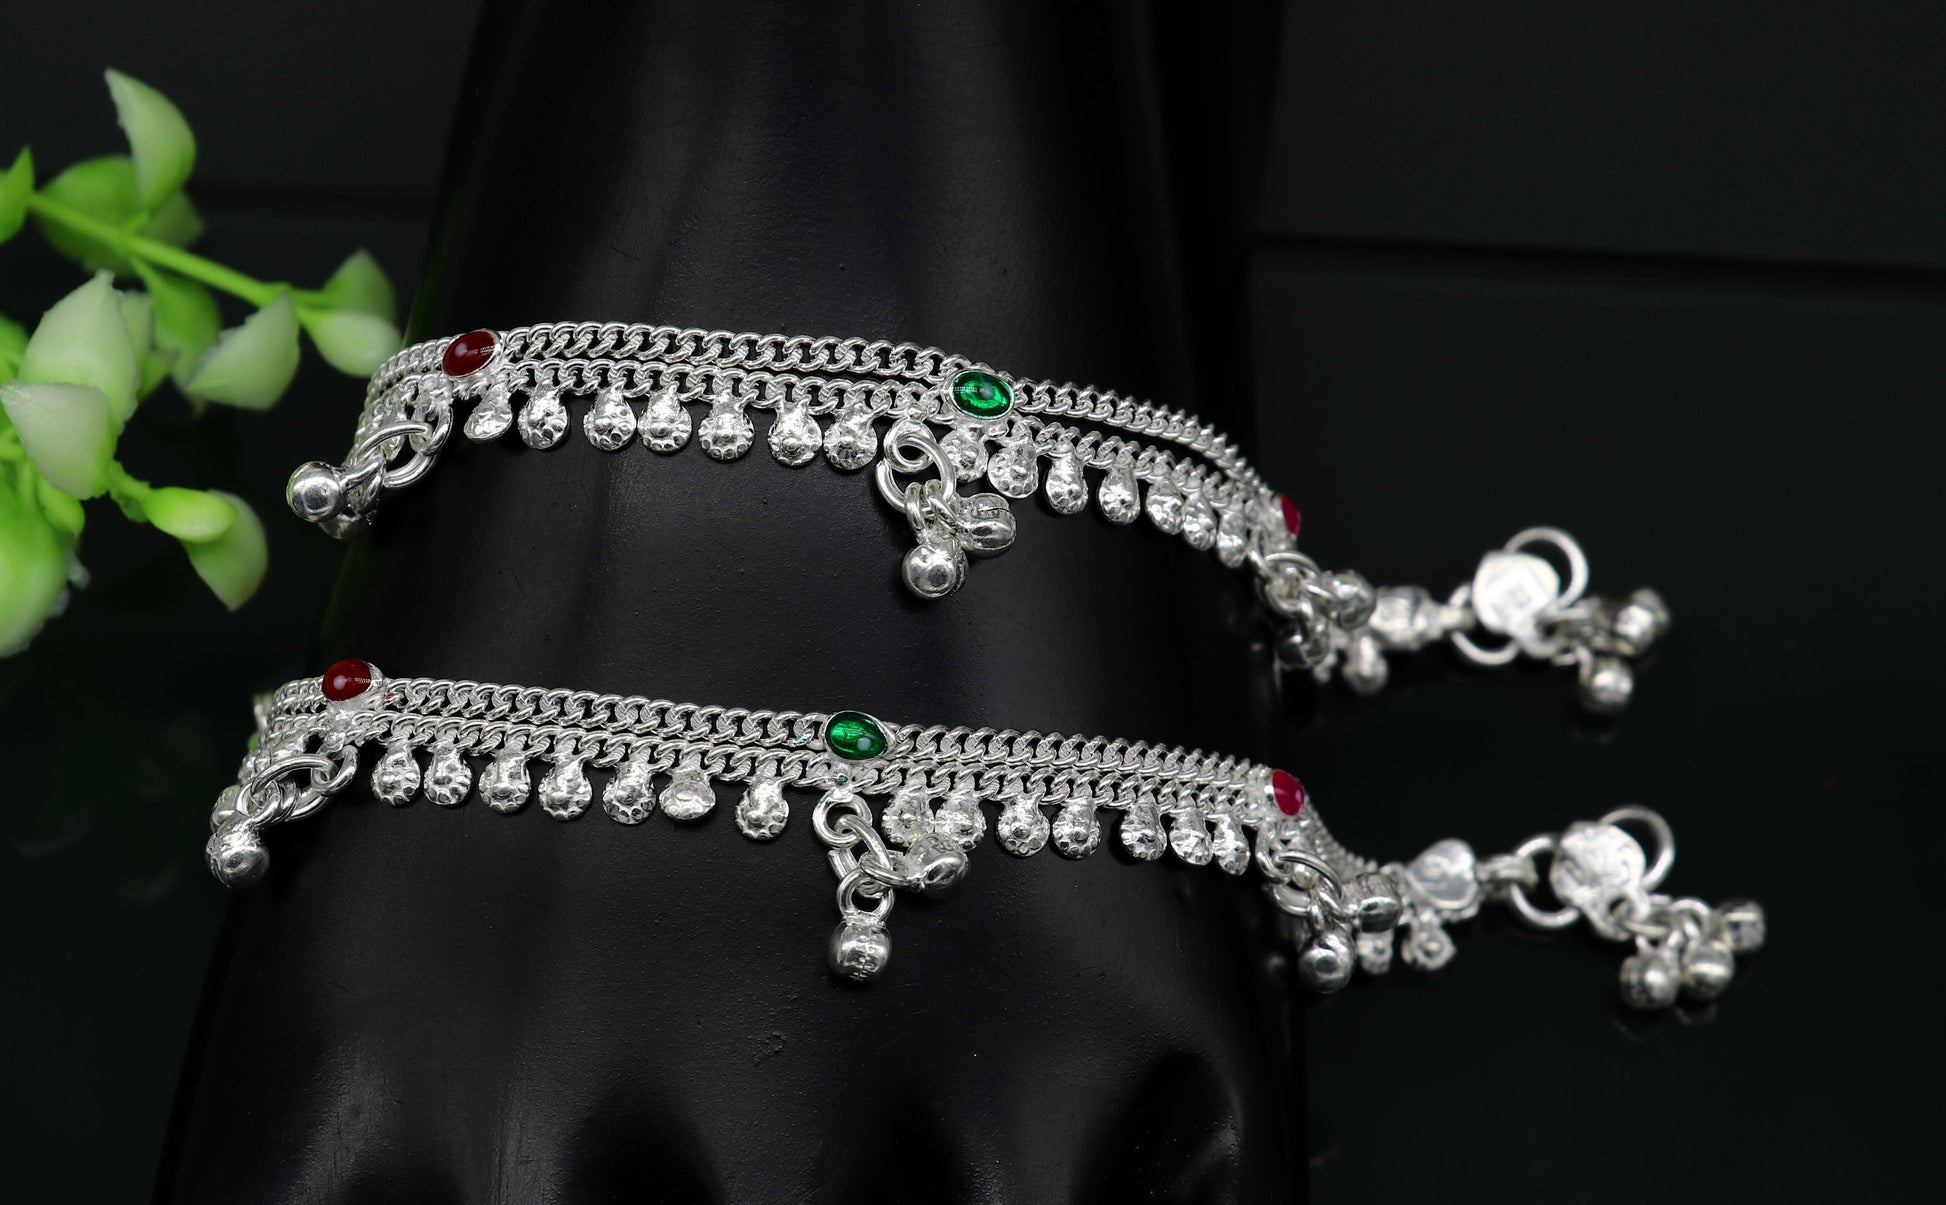 6" handmade solid sterling silver jingling bells noisy anklets, excellent gifting baby foot bracelet charm kids jewelry from india ank363 - TRIBAL ORNAMENTS